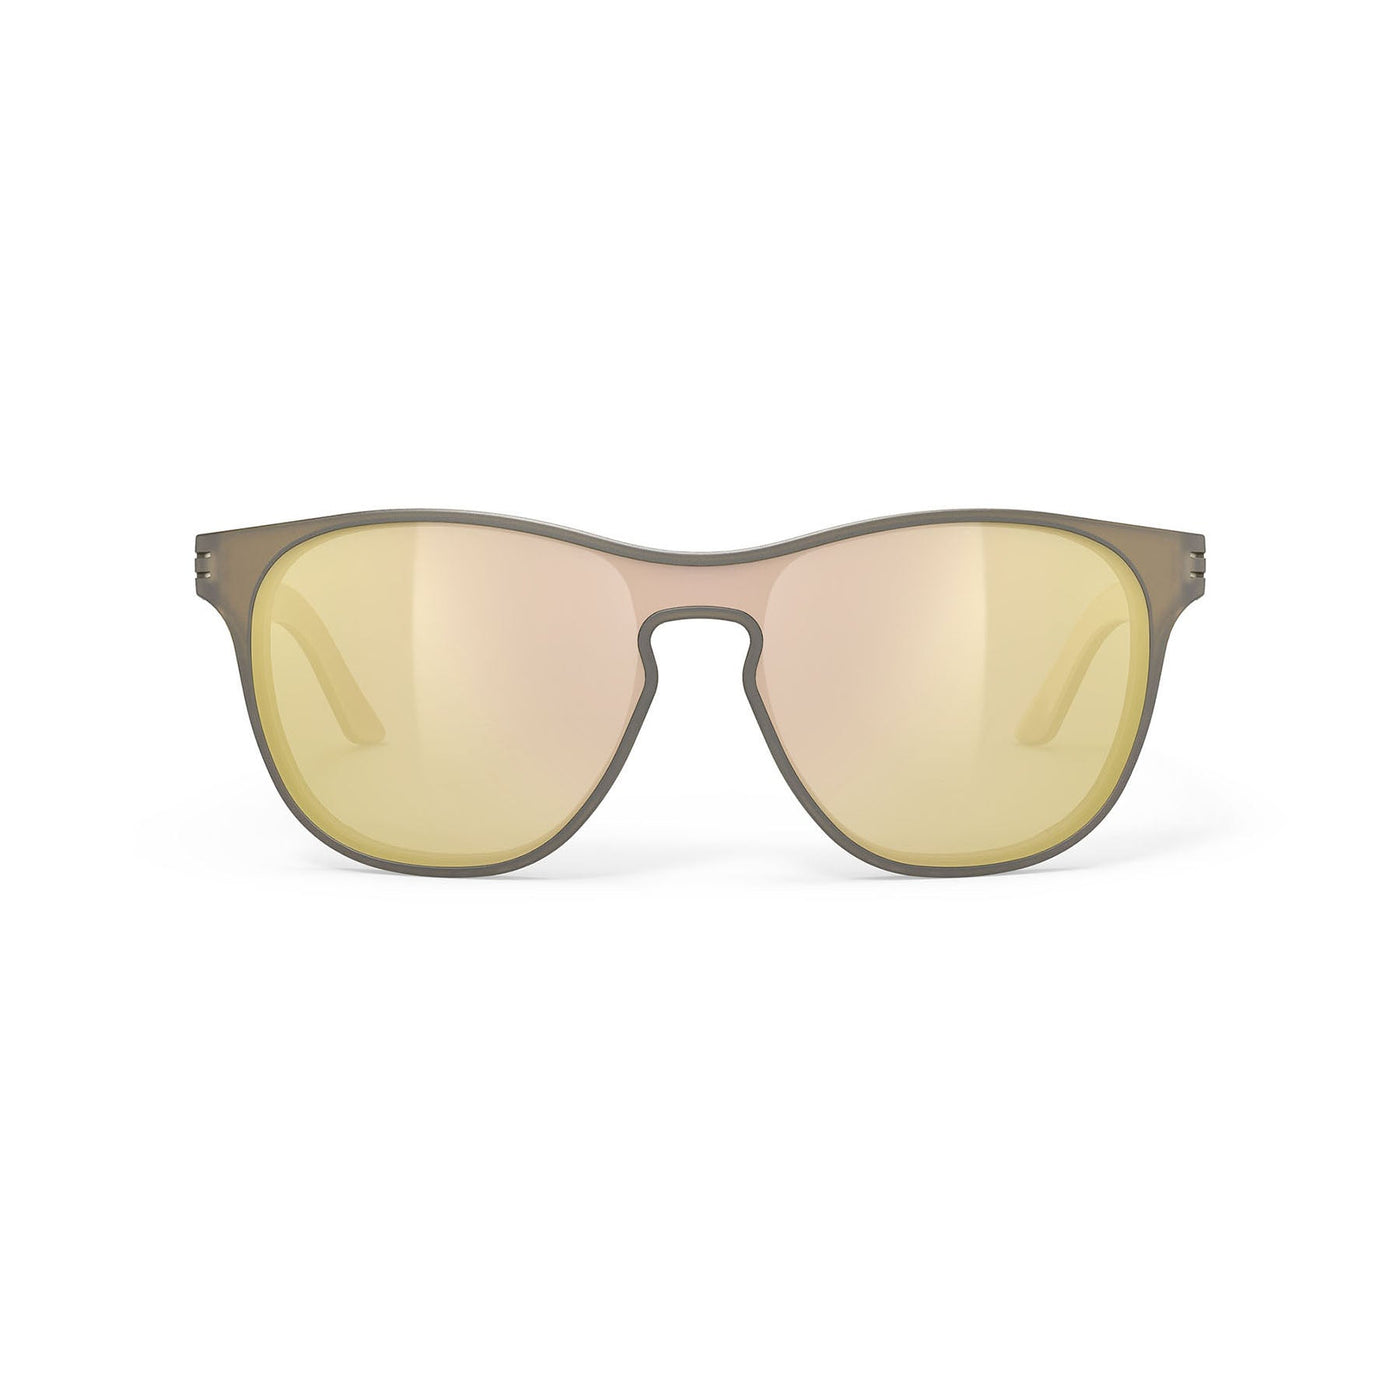 Rudy Project Soundshield lifestyle and beach prescription sunglasses#color_soundshield-ice-gold-matte-with-multilaser-gold-lenses